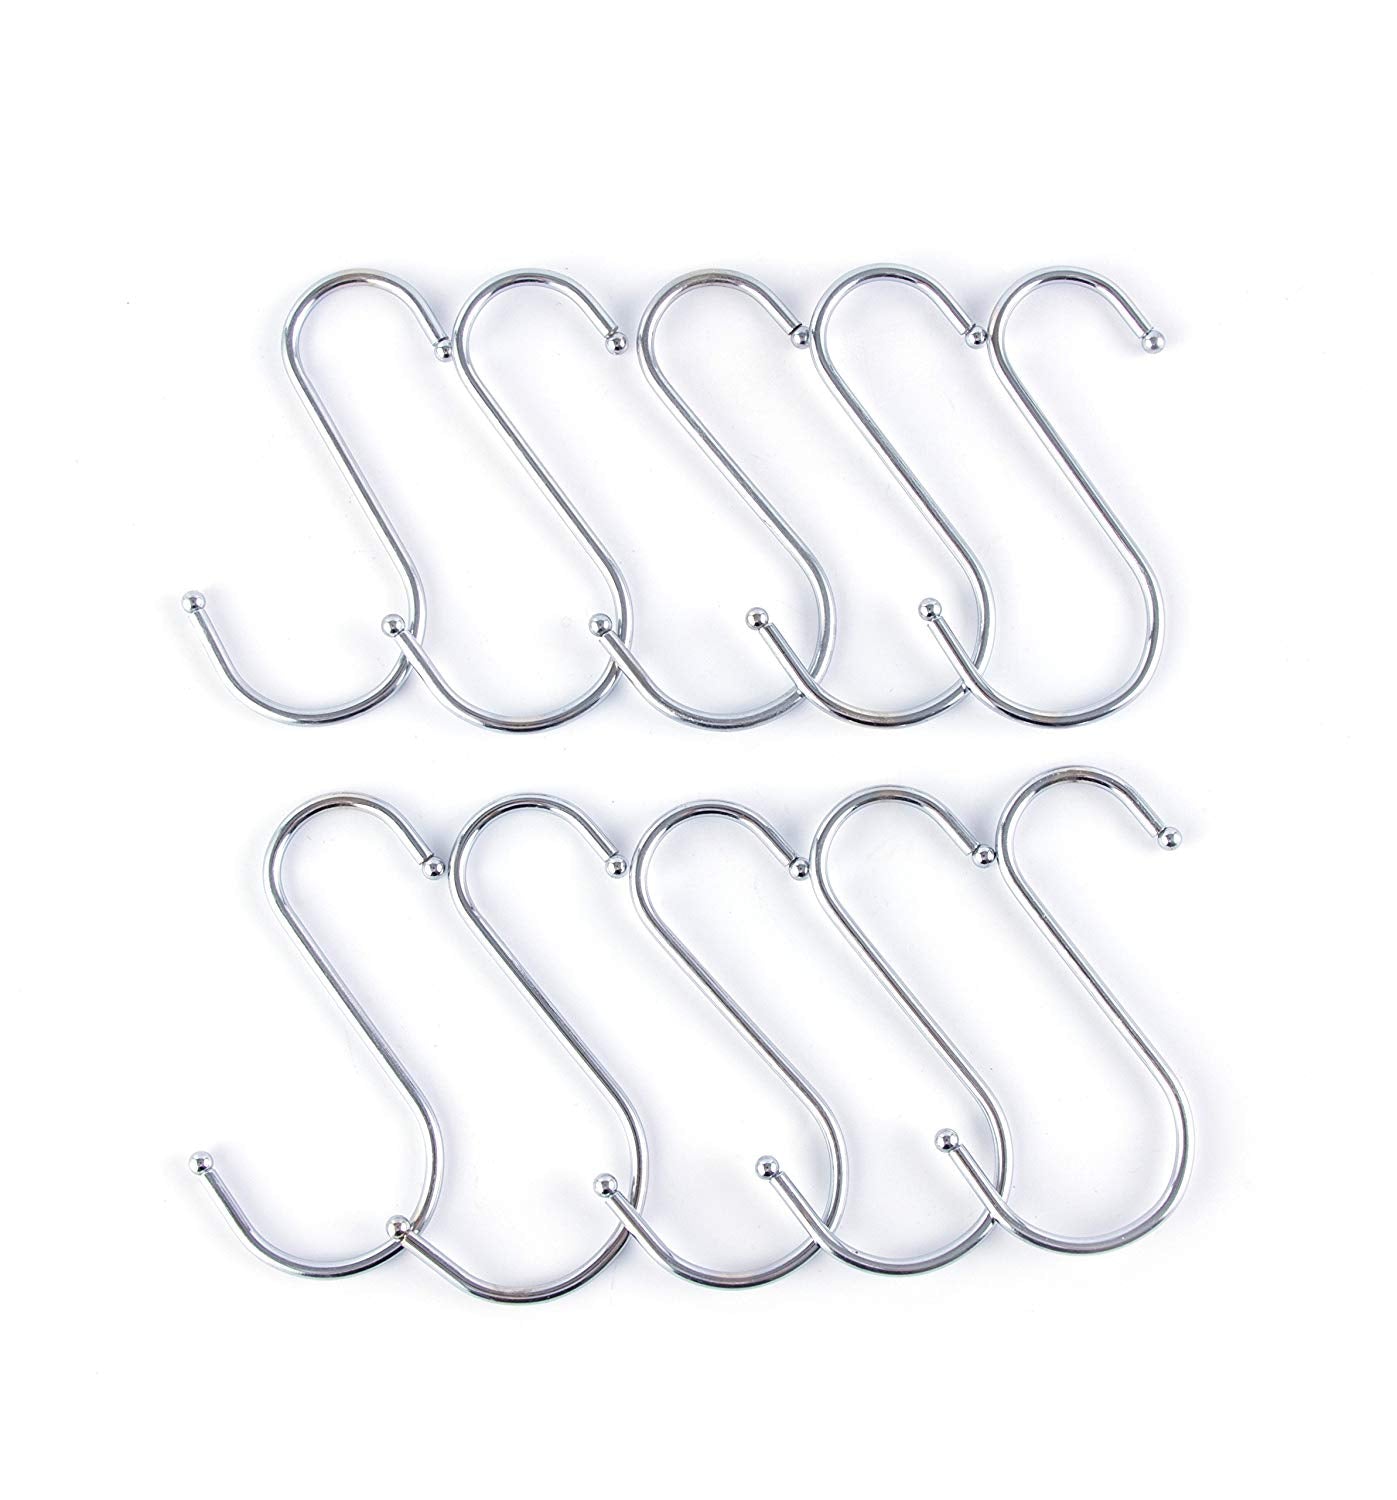 Prudance Large Round S Shaped Hooks Stainless Steel Hanging Hooks Set With 20 Hooks - Ideal for Pots, Pans, Spoons and Other Kitchen Essentials - Perfect for Clothing